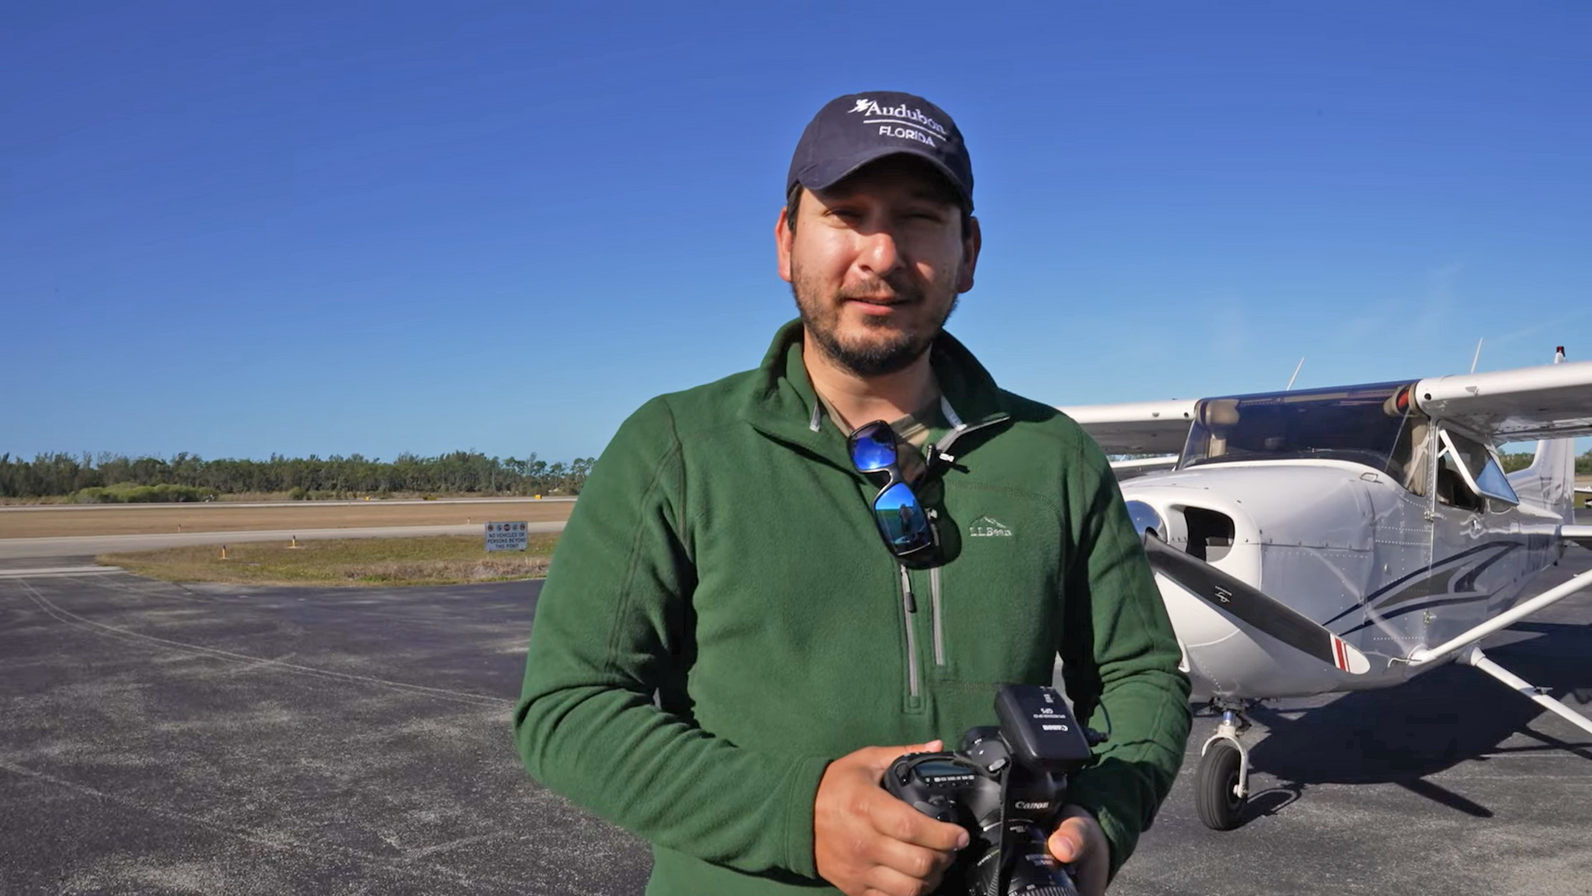 A man holding a camera standing in front of an airplane